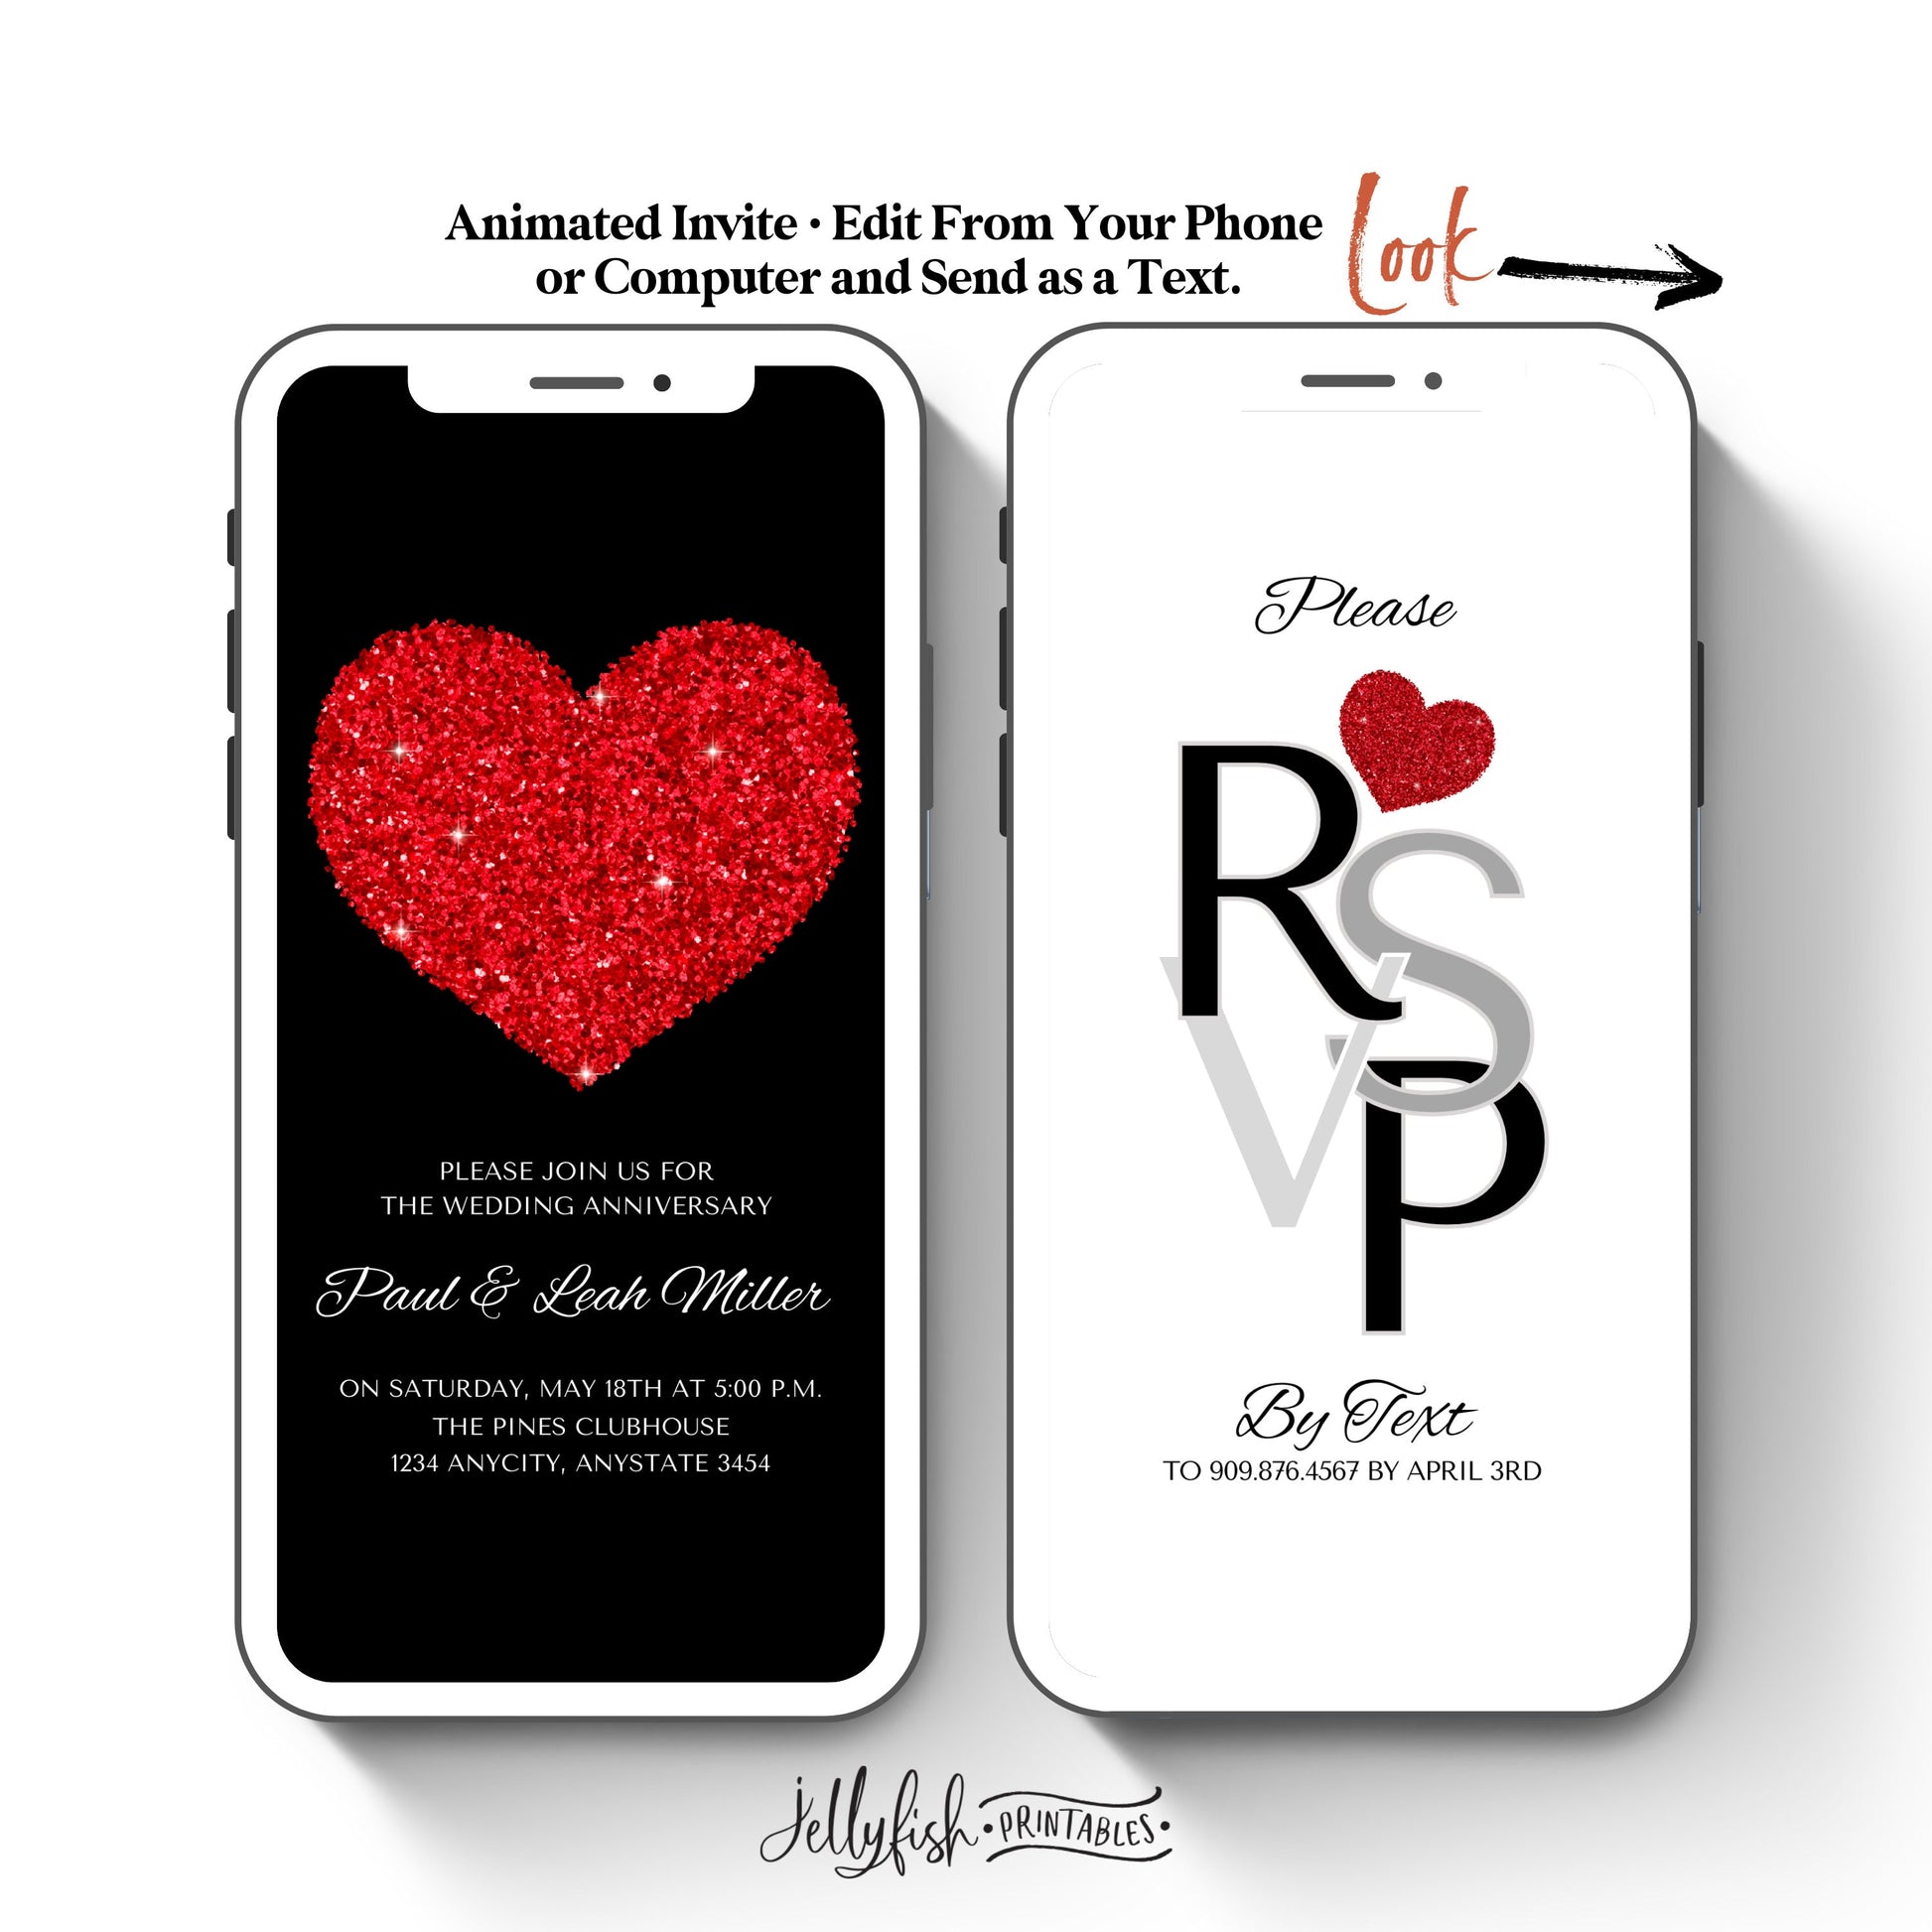 Red Heart Anniversary Video Invitation Template. Send Today!